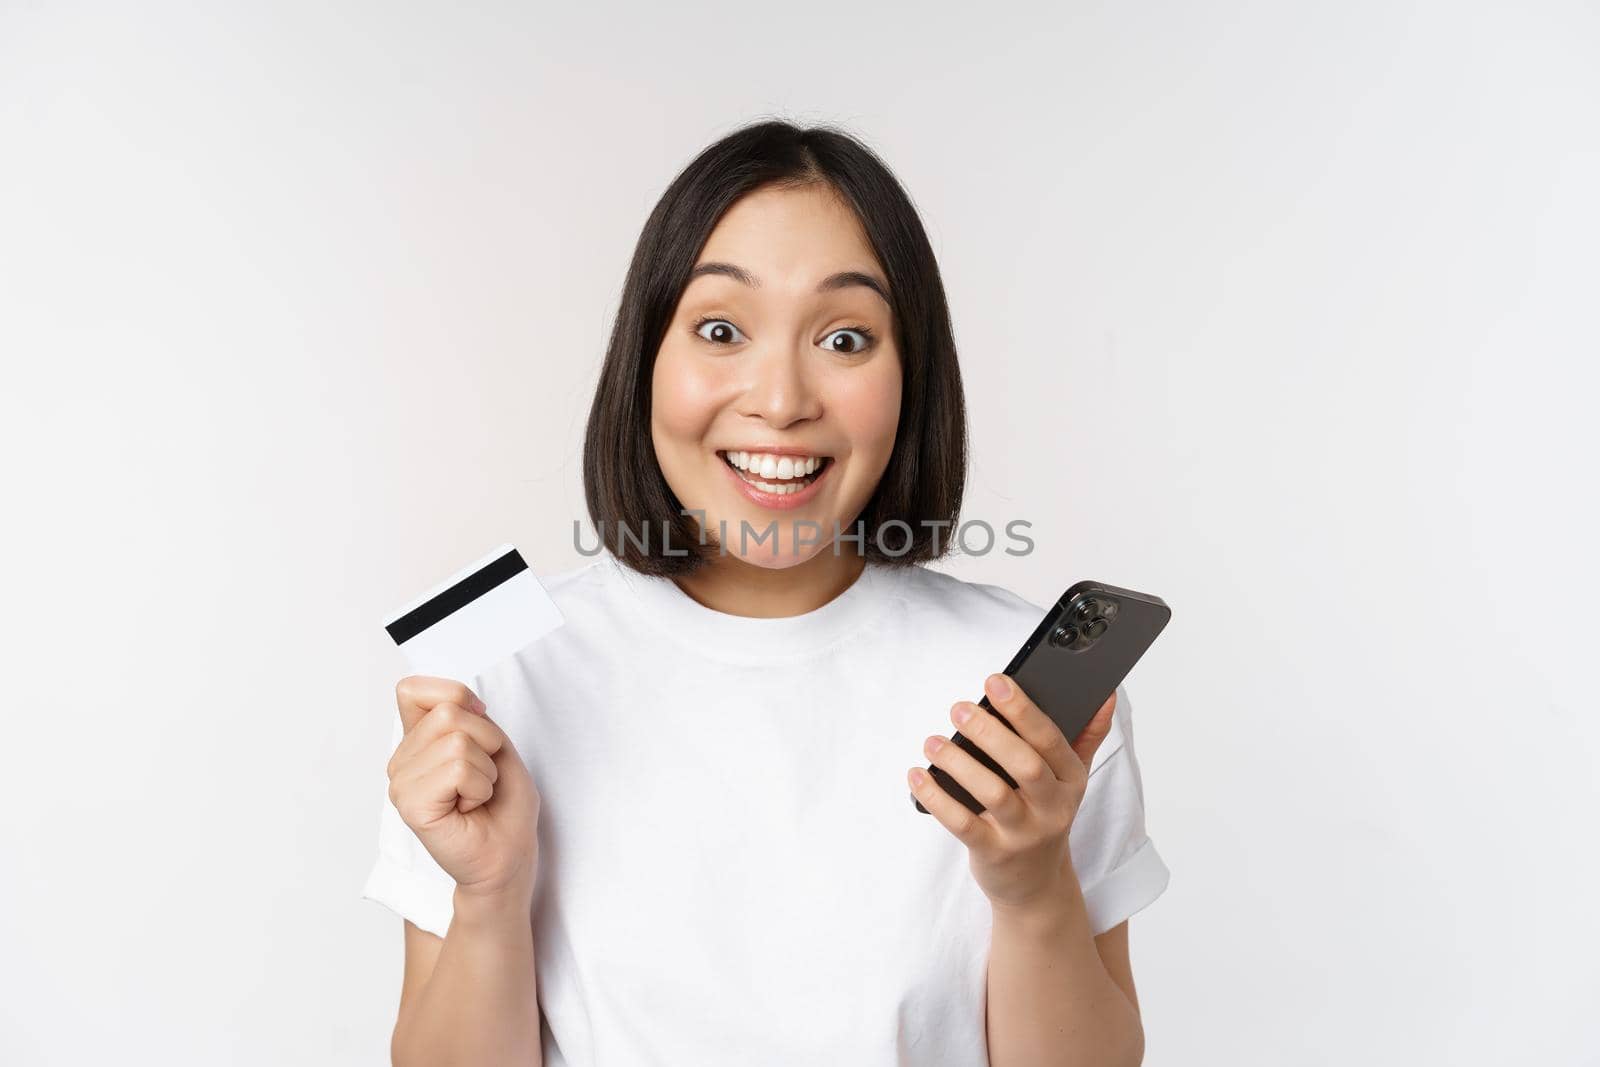 Online shopping. Happy asian woman using credit card and smartphone app, paying on website via mobile phone, white background.